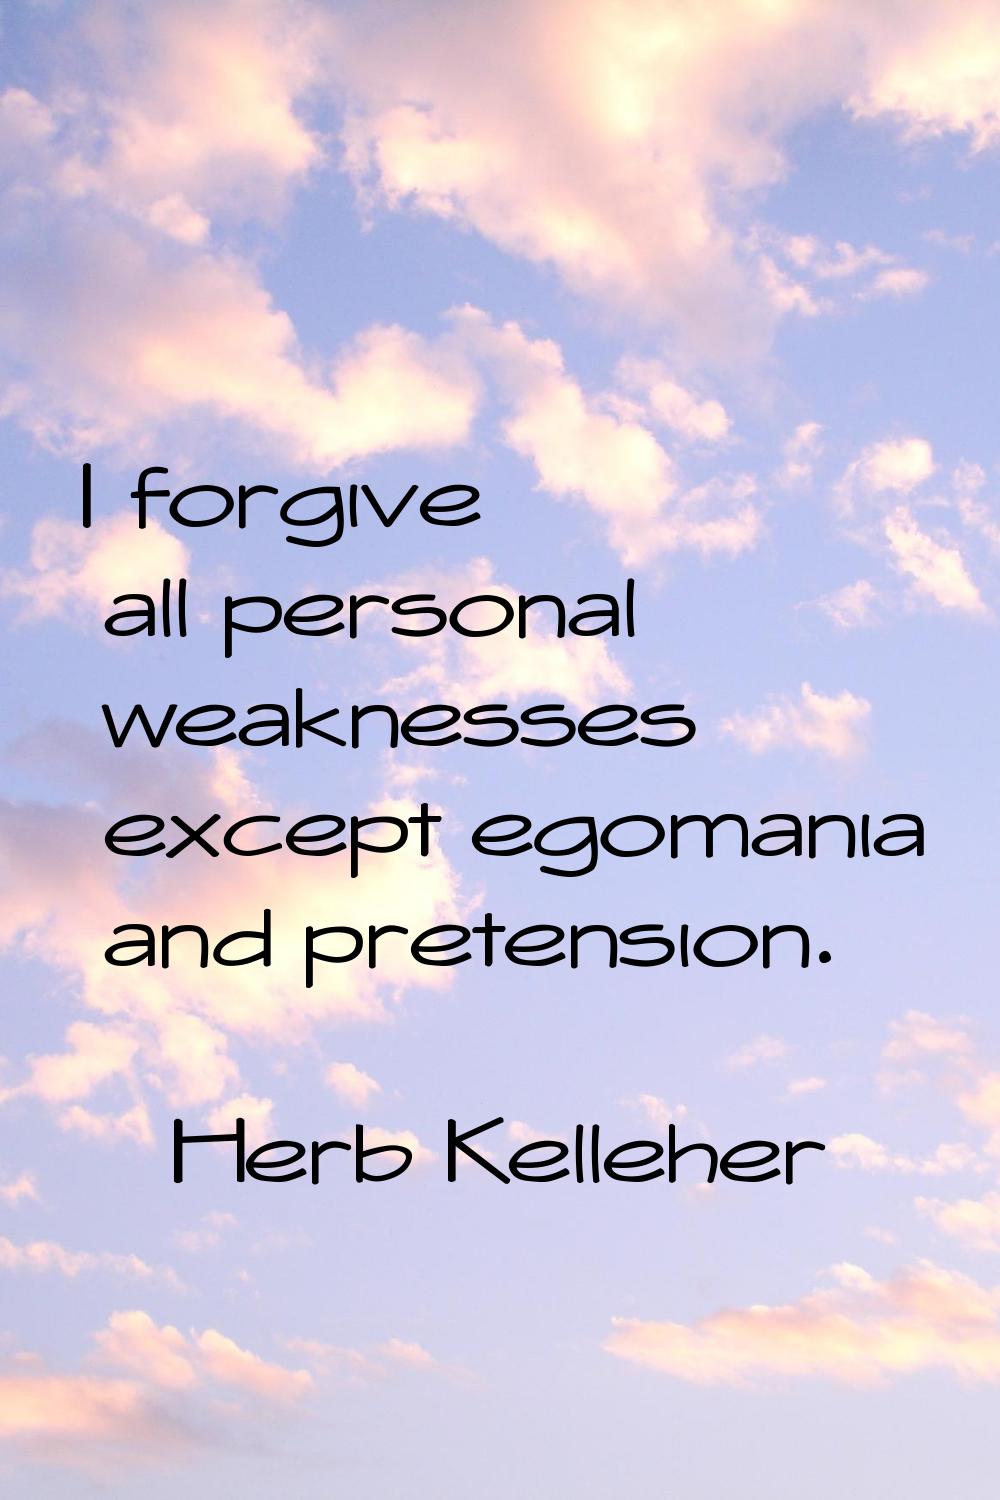 I forgive all personal weaknesses except egomania and pretension.